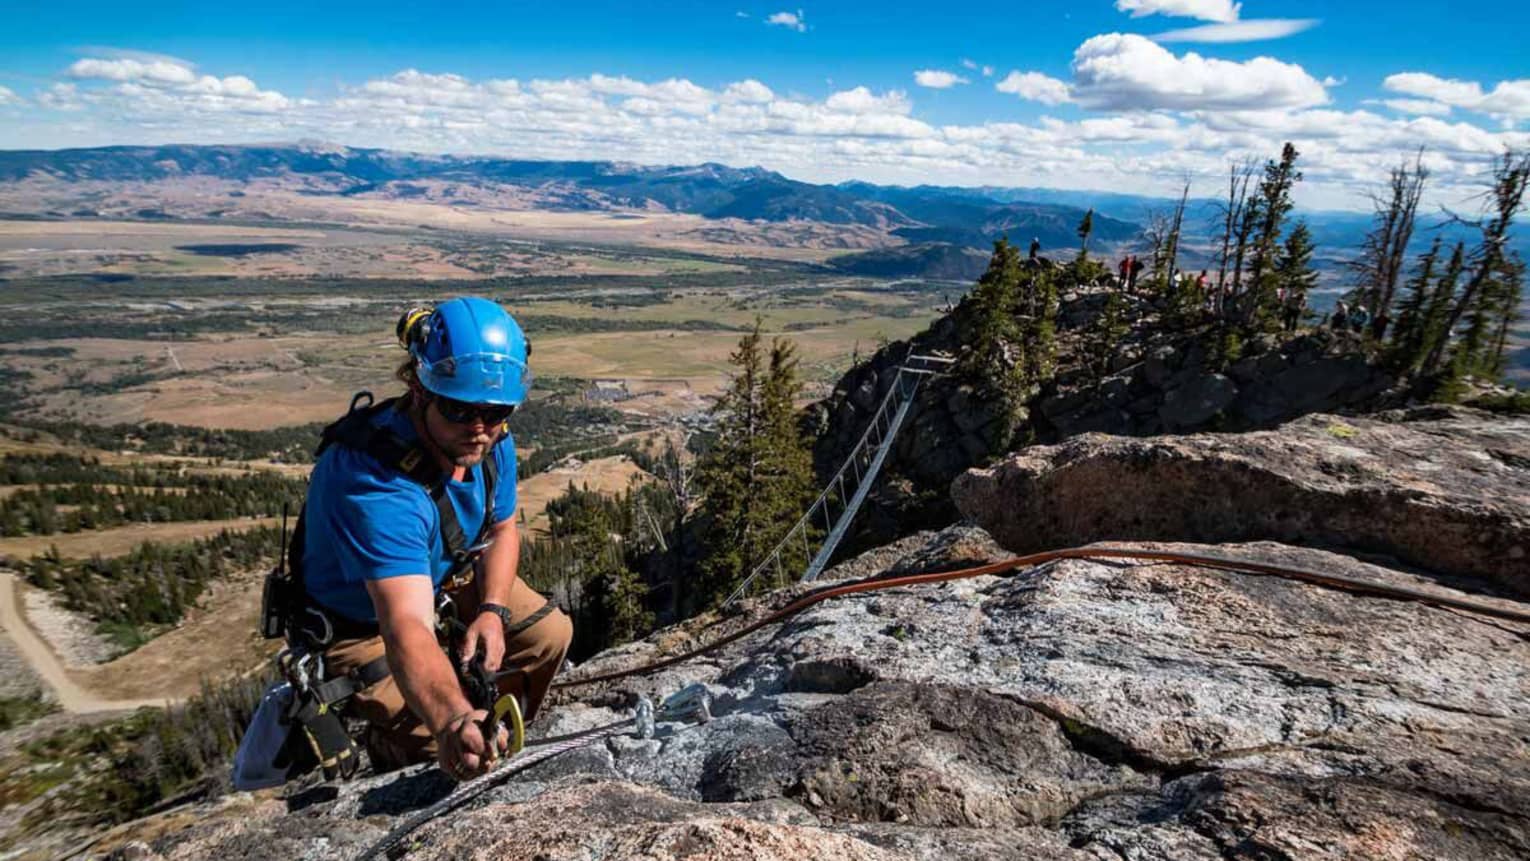 A man in blue clothes and blue helmet rock climbing, an open vista of green land and mountains can be seen behind him.